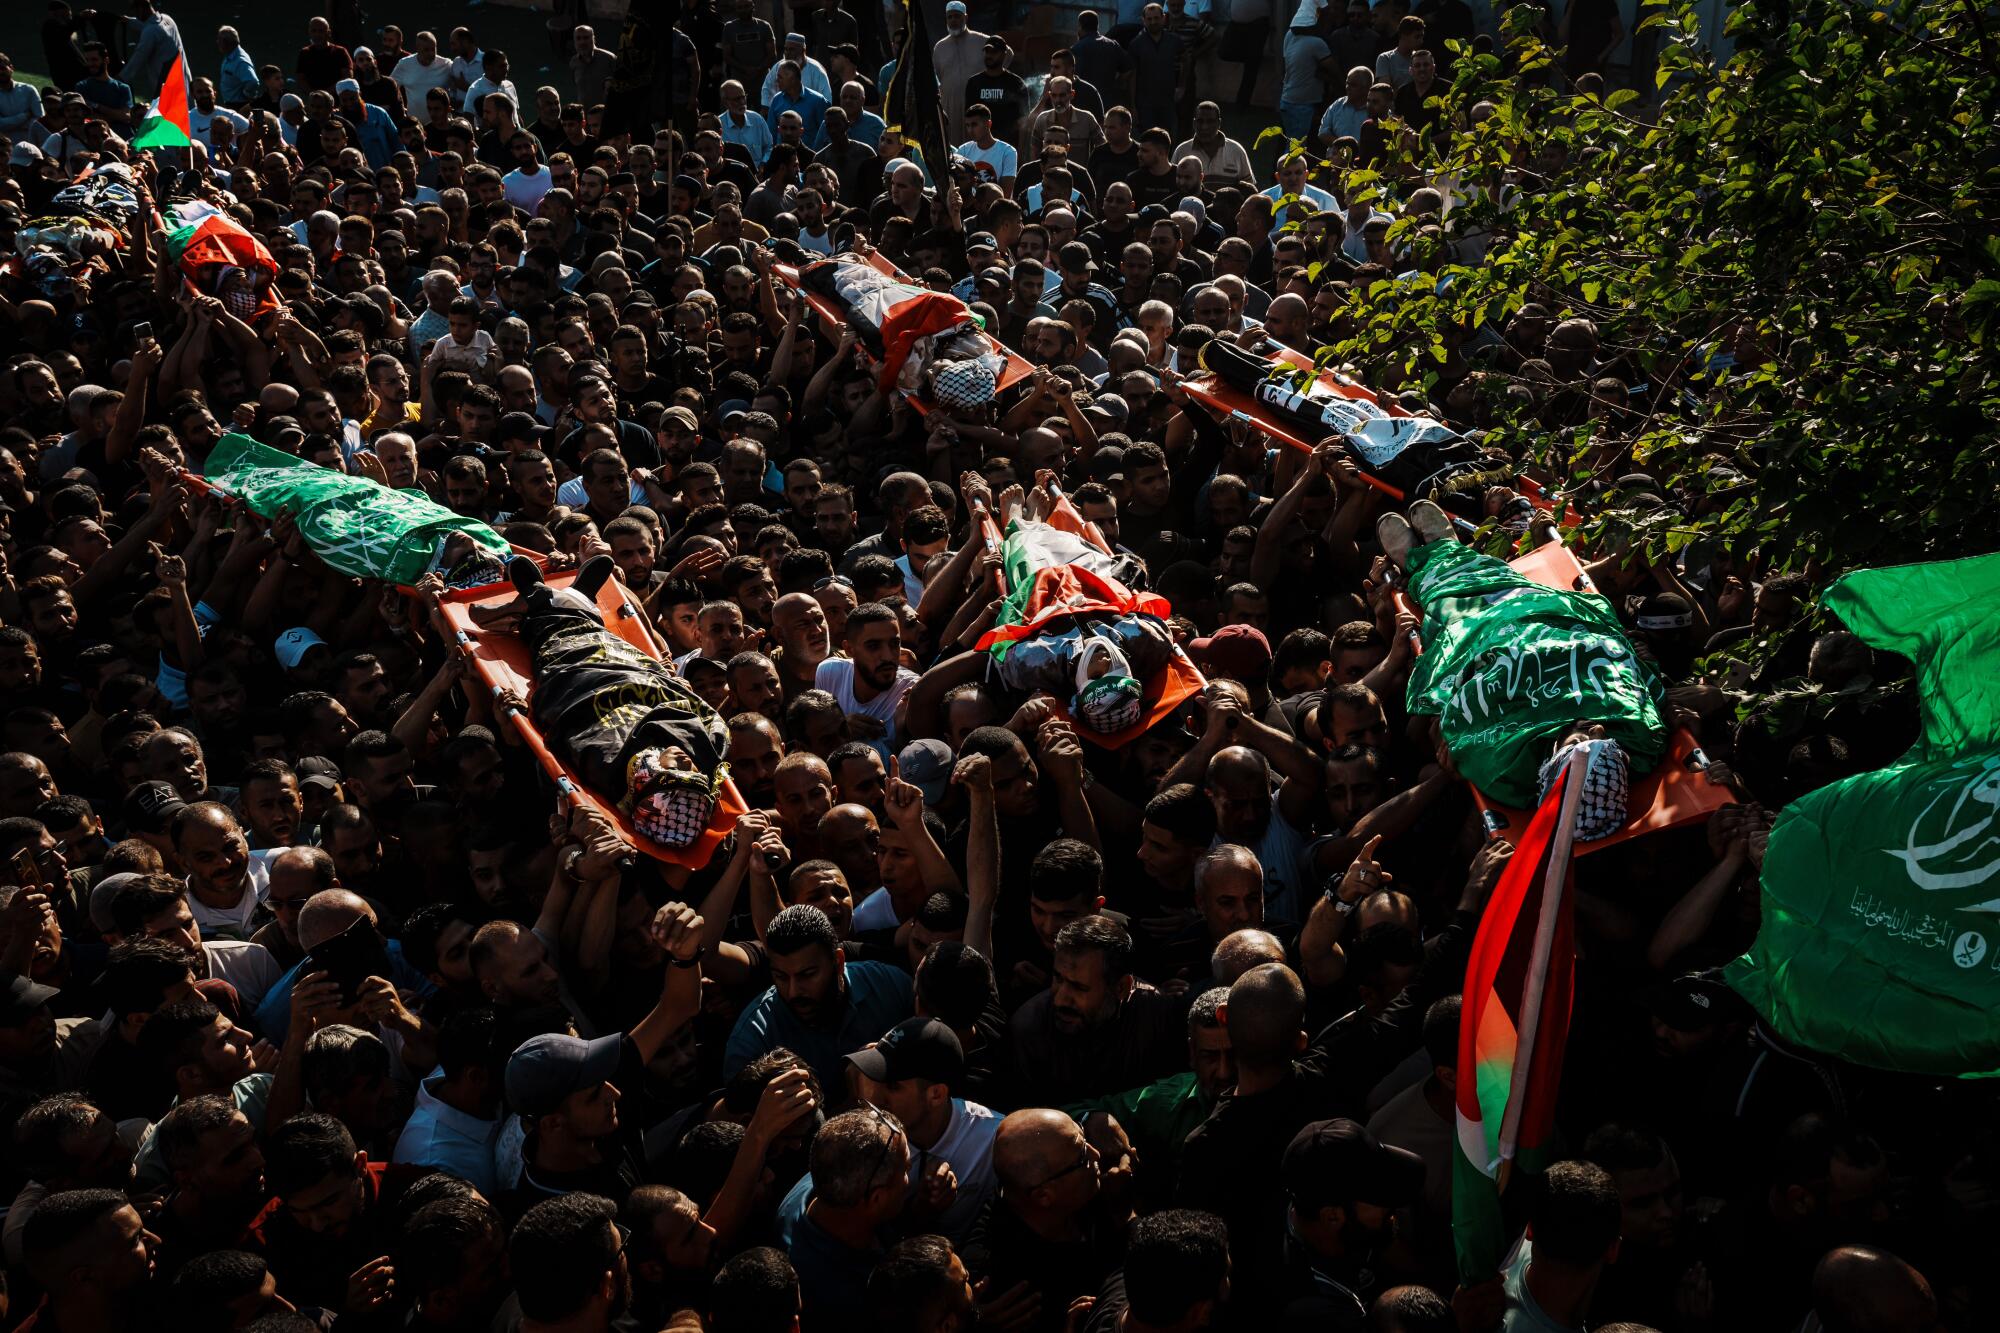 A sea of mourners carry over their heads bodies on litters draped with the Palestinian flag. 